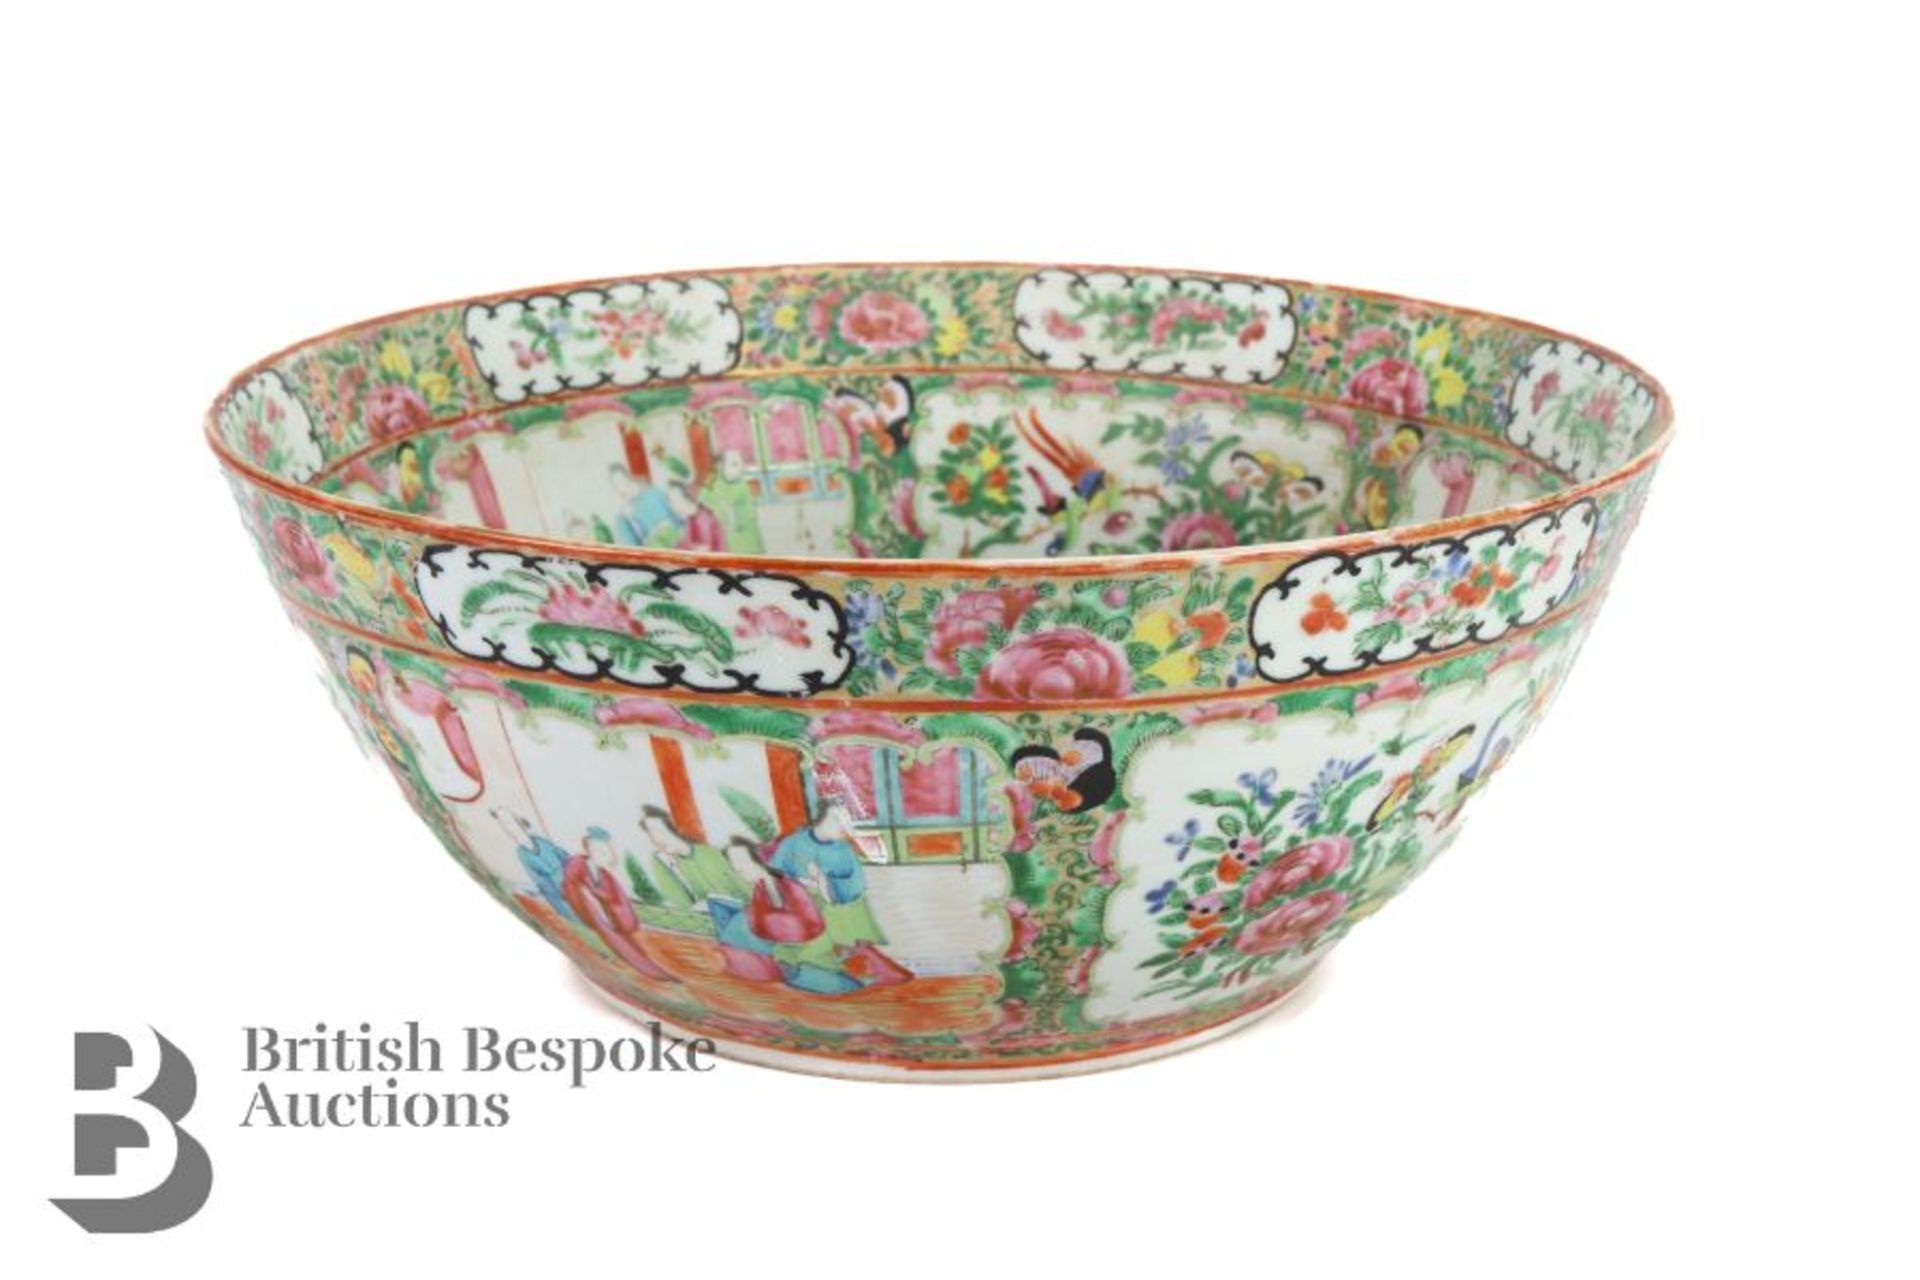 Late 19th century Cantonese Bowl